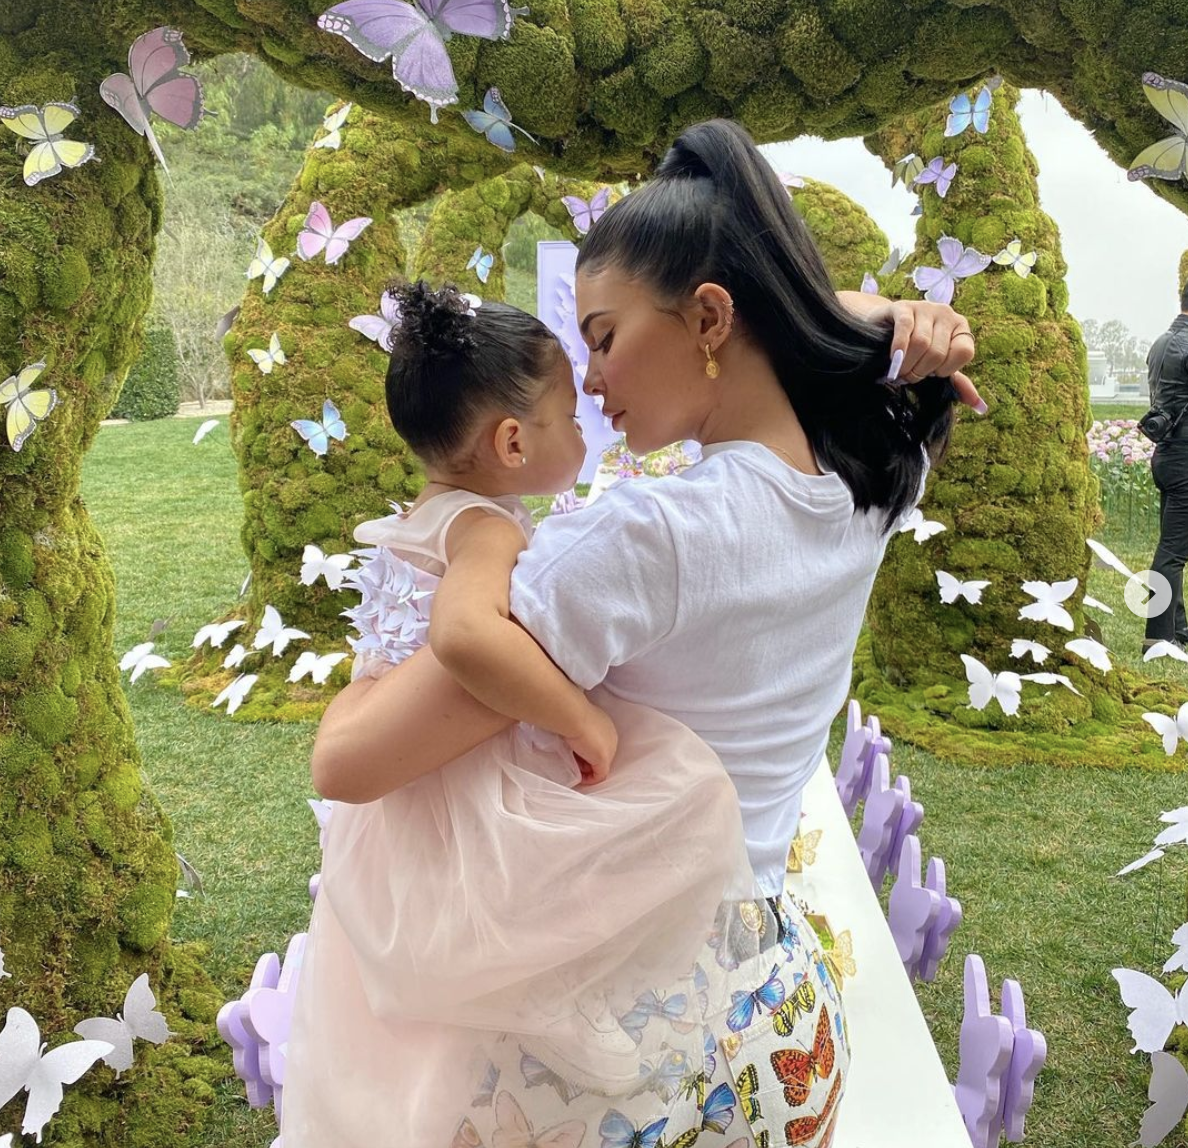 Kylie Jenner and daughter Stormi in their garden. 